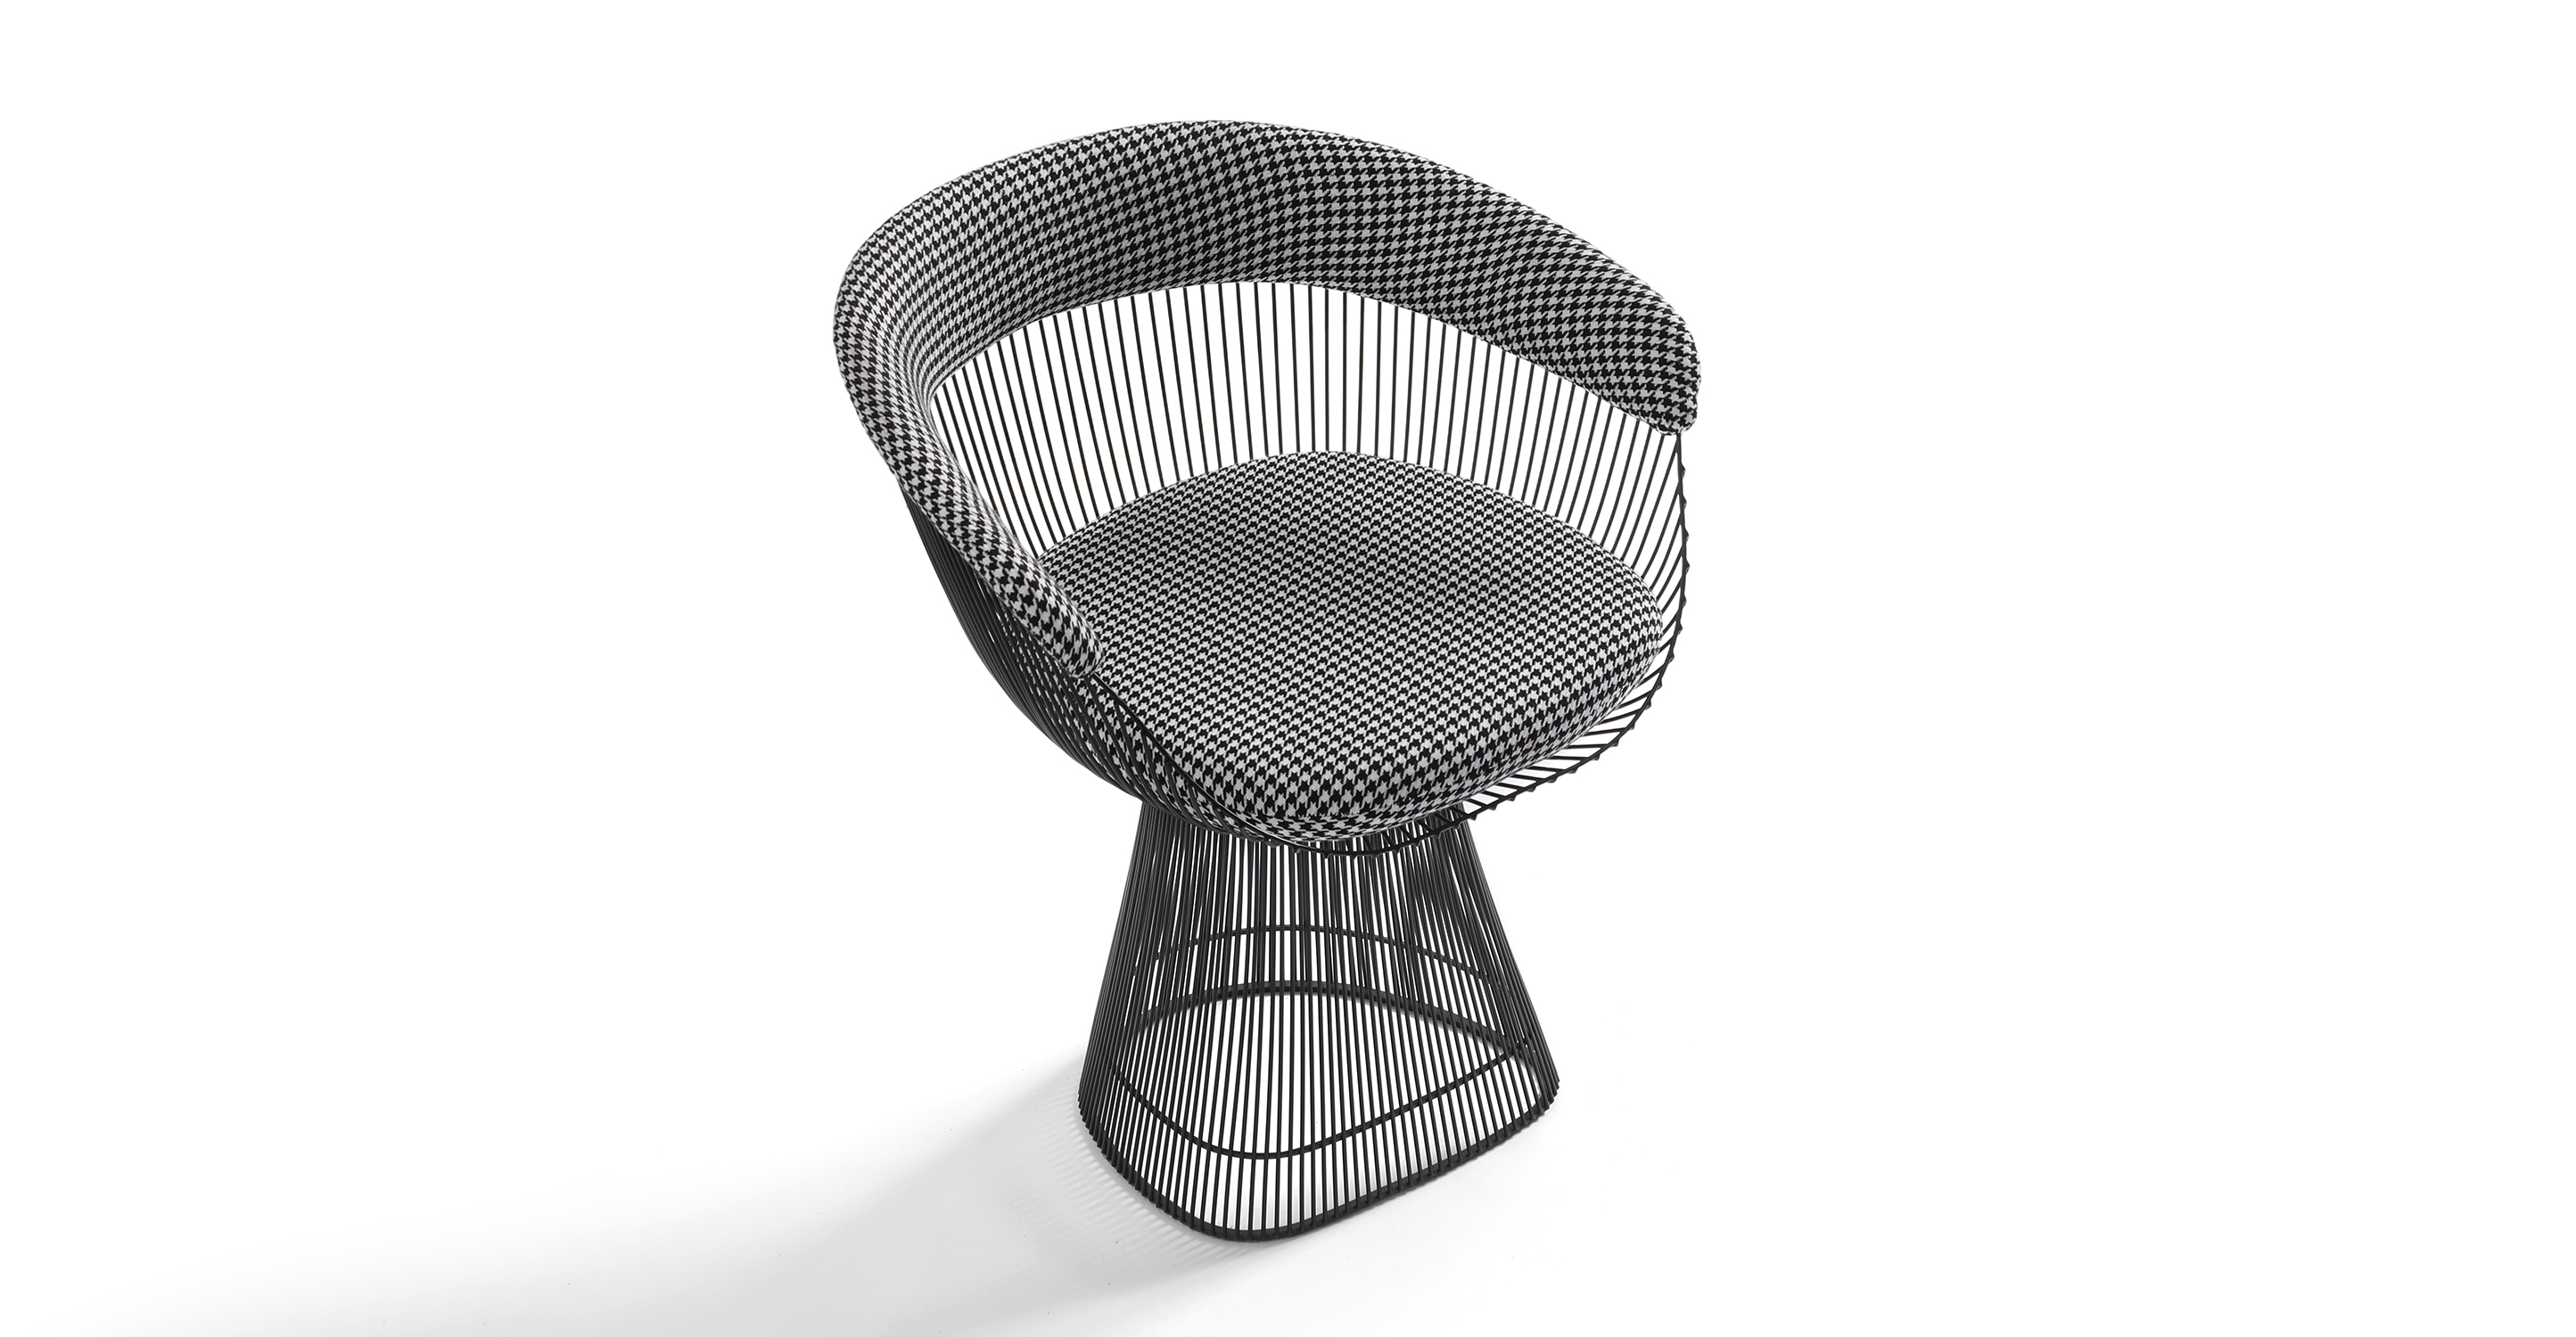 The Platner dining chairs have a wide base that tapers up and meets a bucket seat also made of black stainless steel rods. The arms and black are cushioned with upholstery and the seat has a removable cushion. 